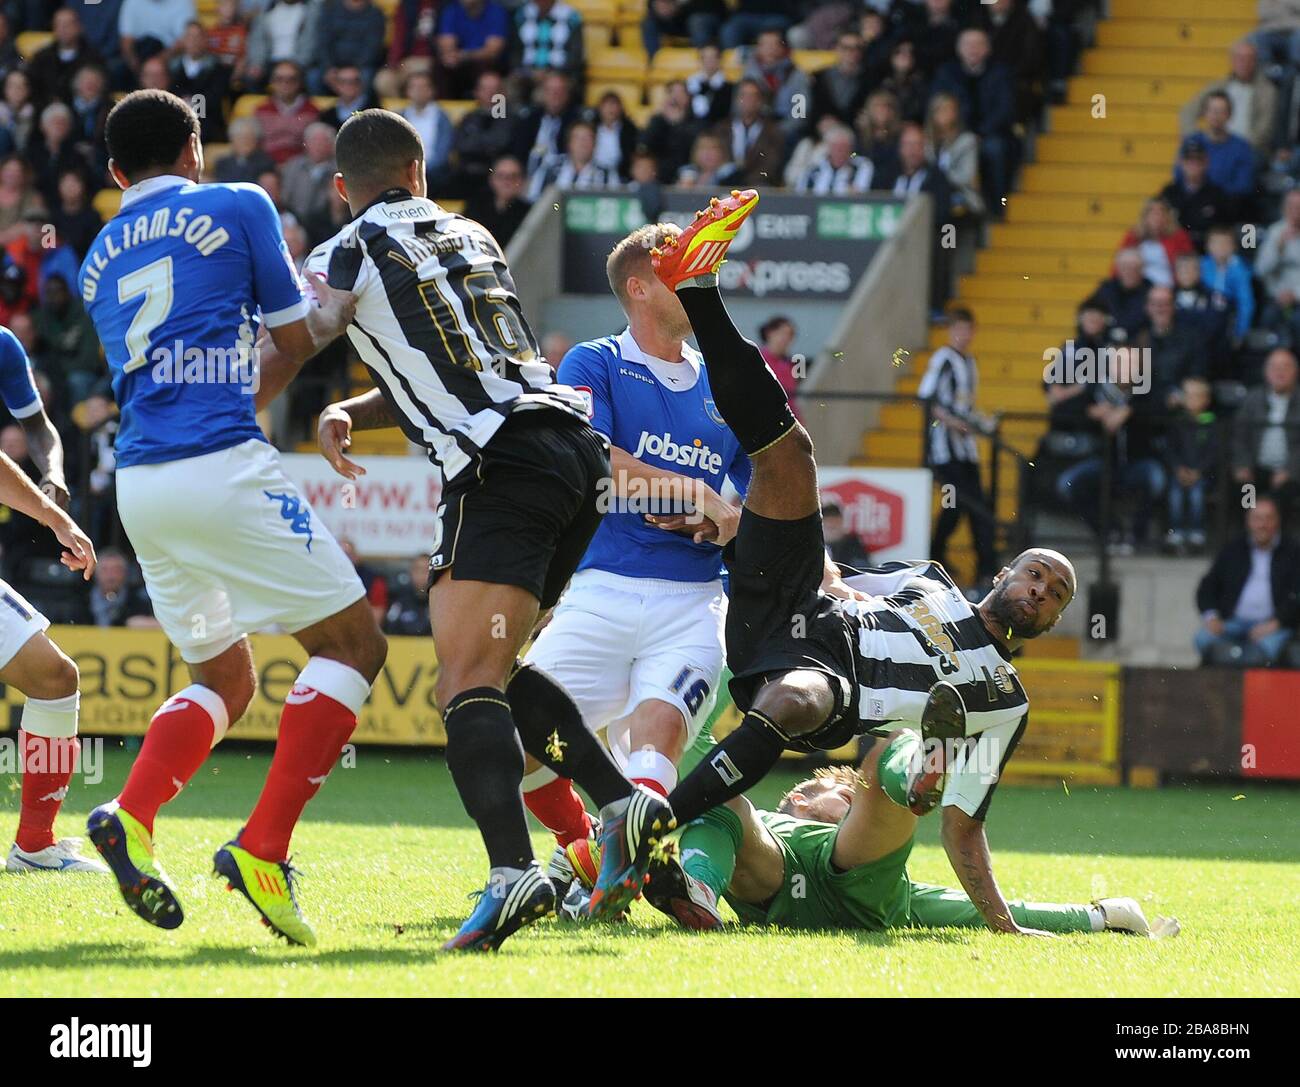 Notts County's Yoann Arquin clashes with Portsmouth's goalkeeper Mikkel Andersen as he scores their first goal Stock Photo